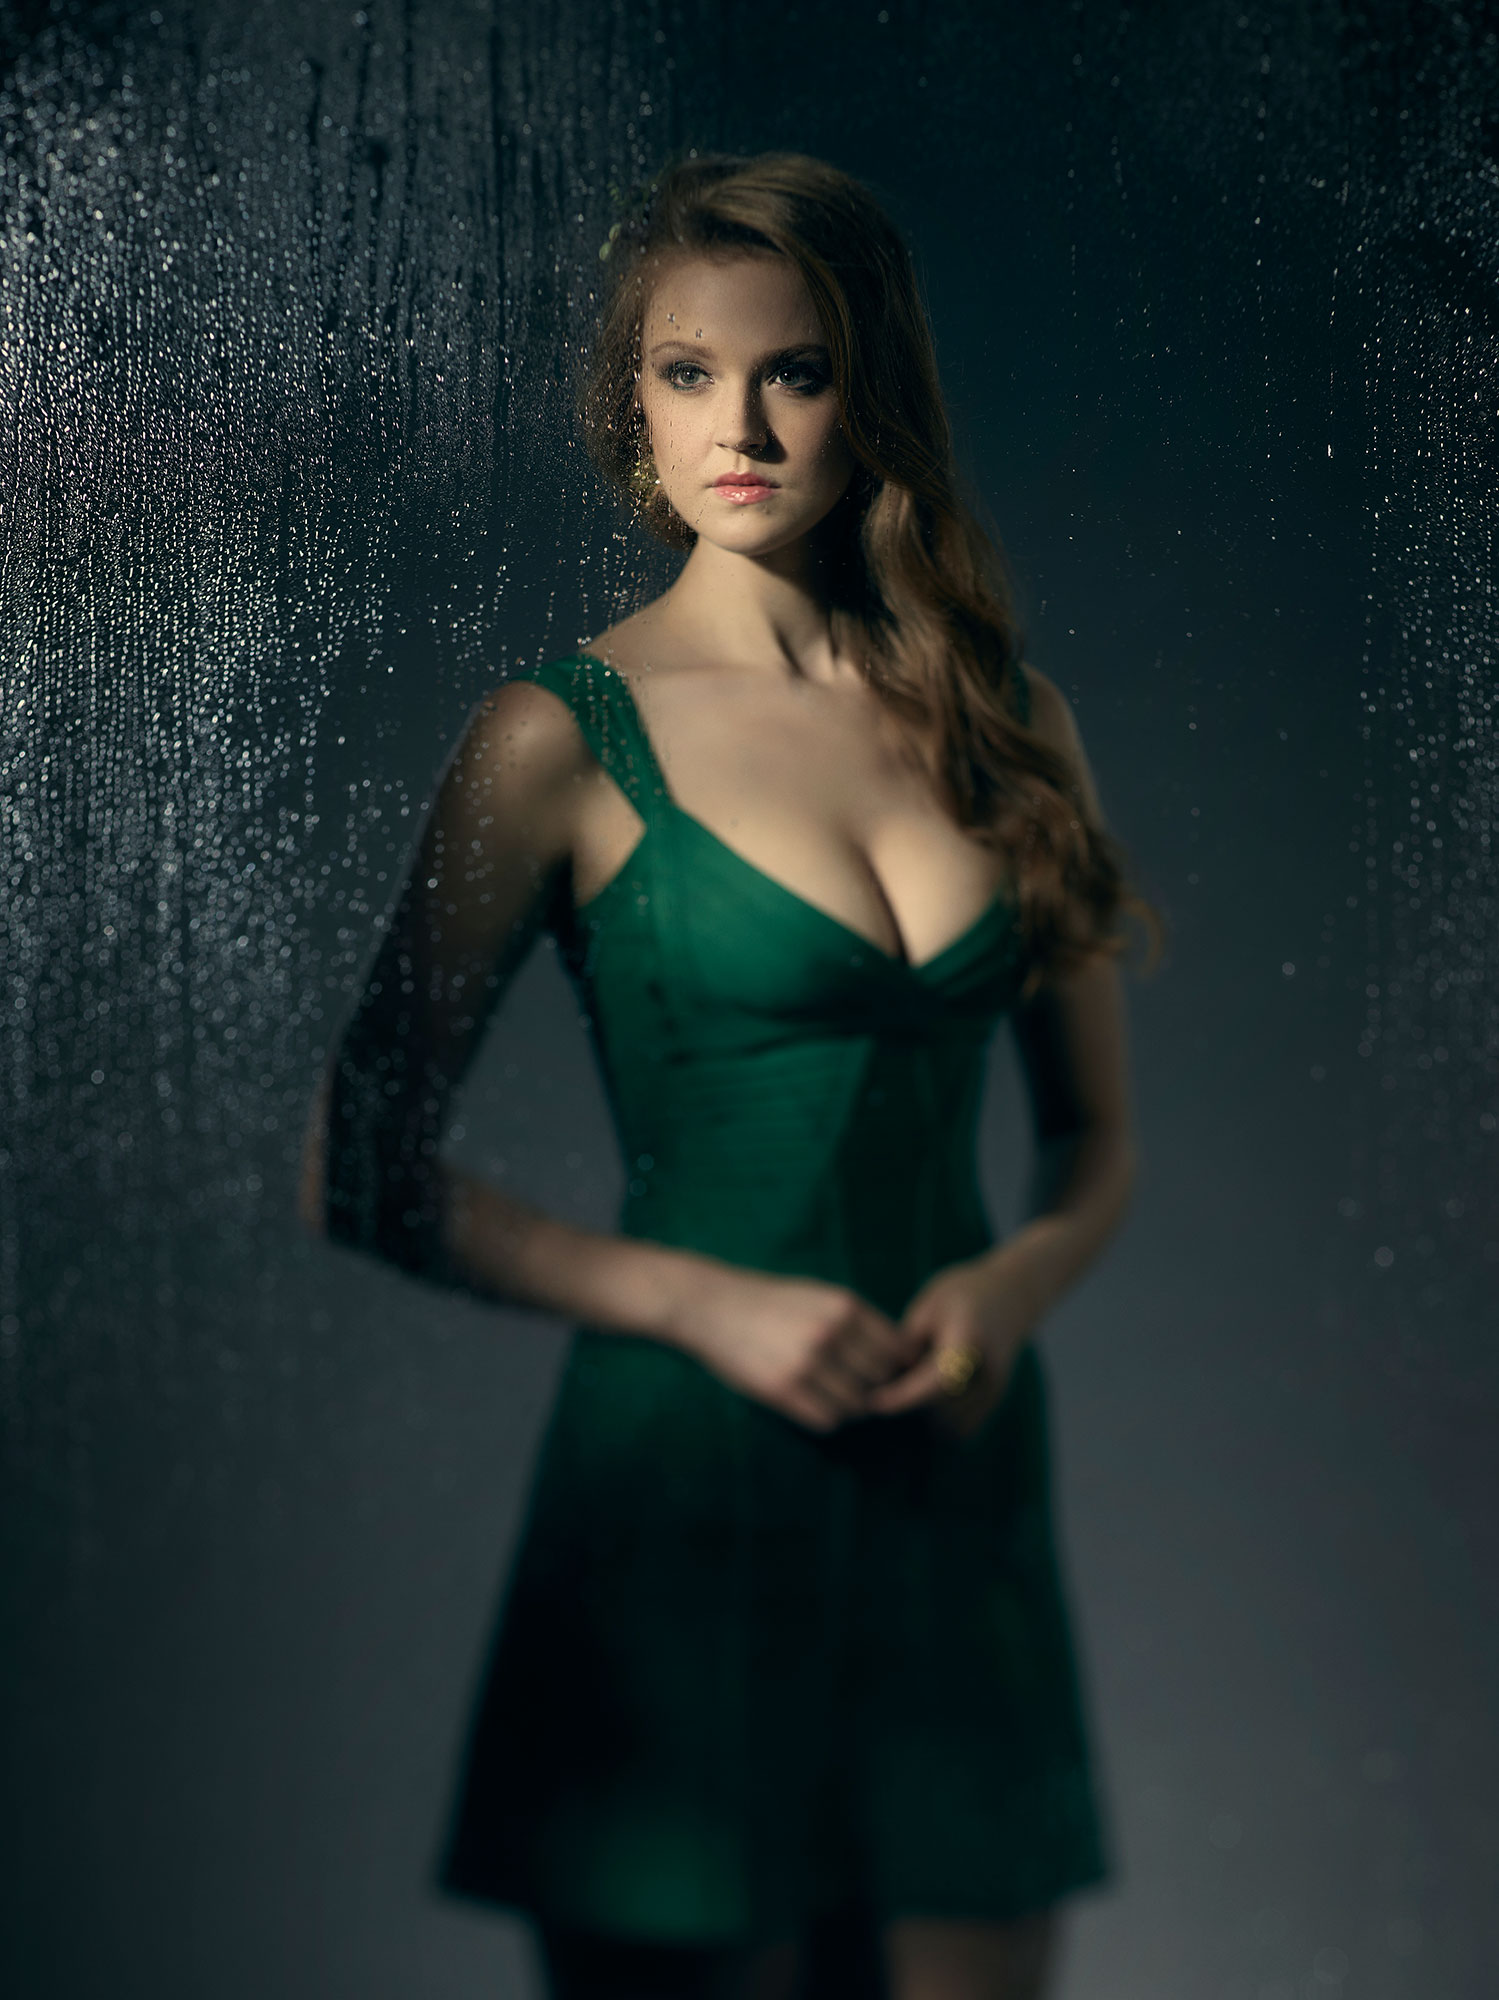 Gotham': First Look at Maggie Geha as a More Grown Up Poison Ivy.